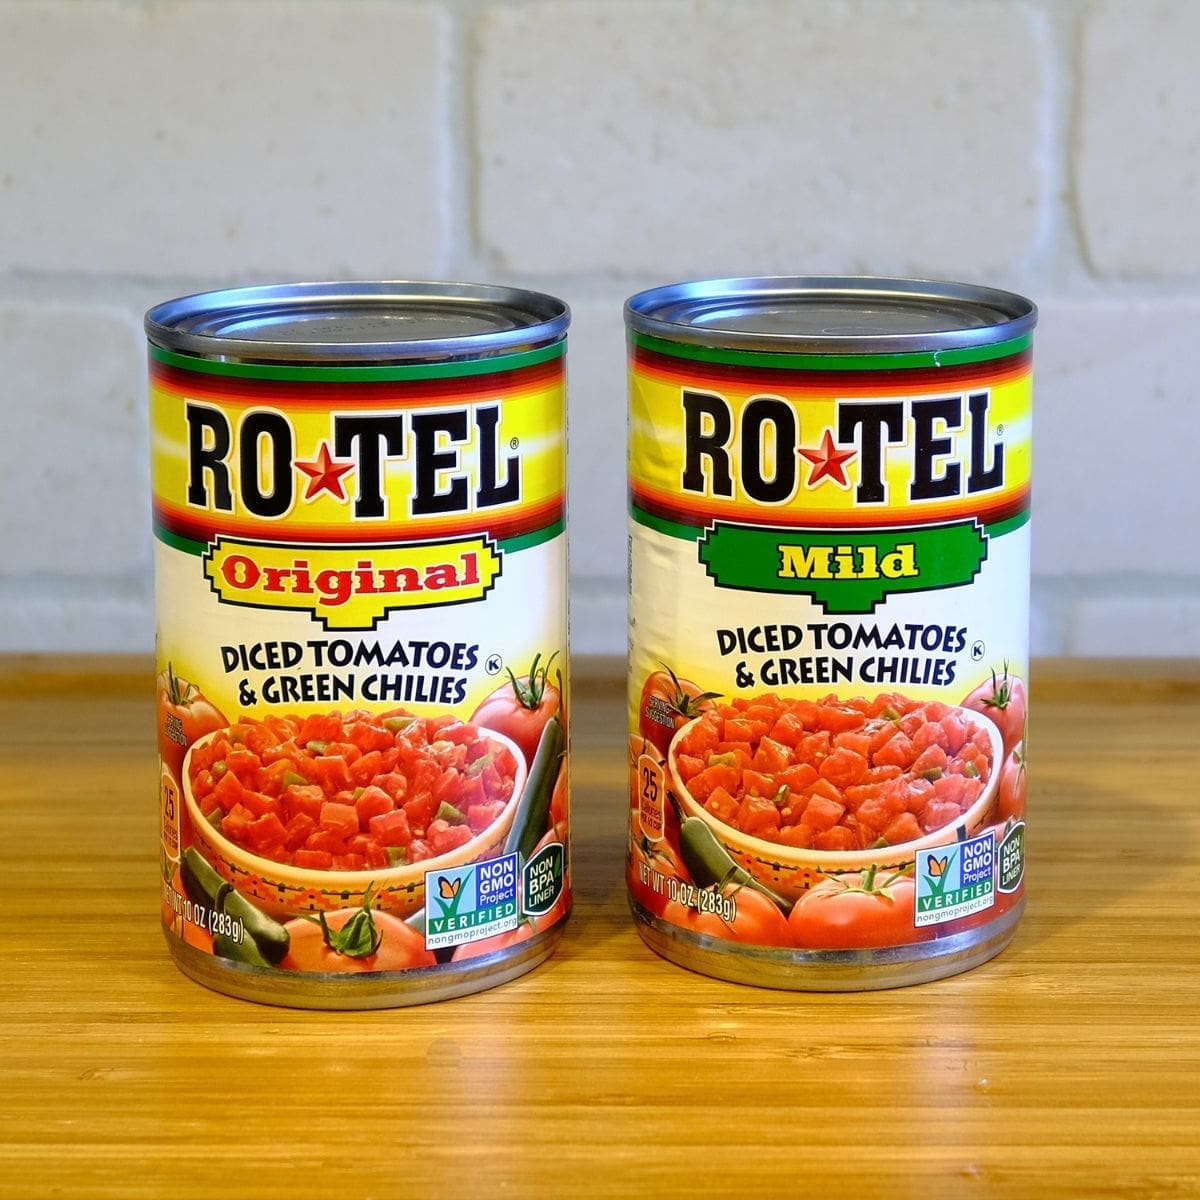 What Is A Good Substitute For Rotel Tomatoes?